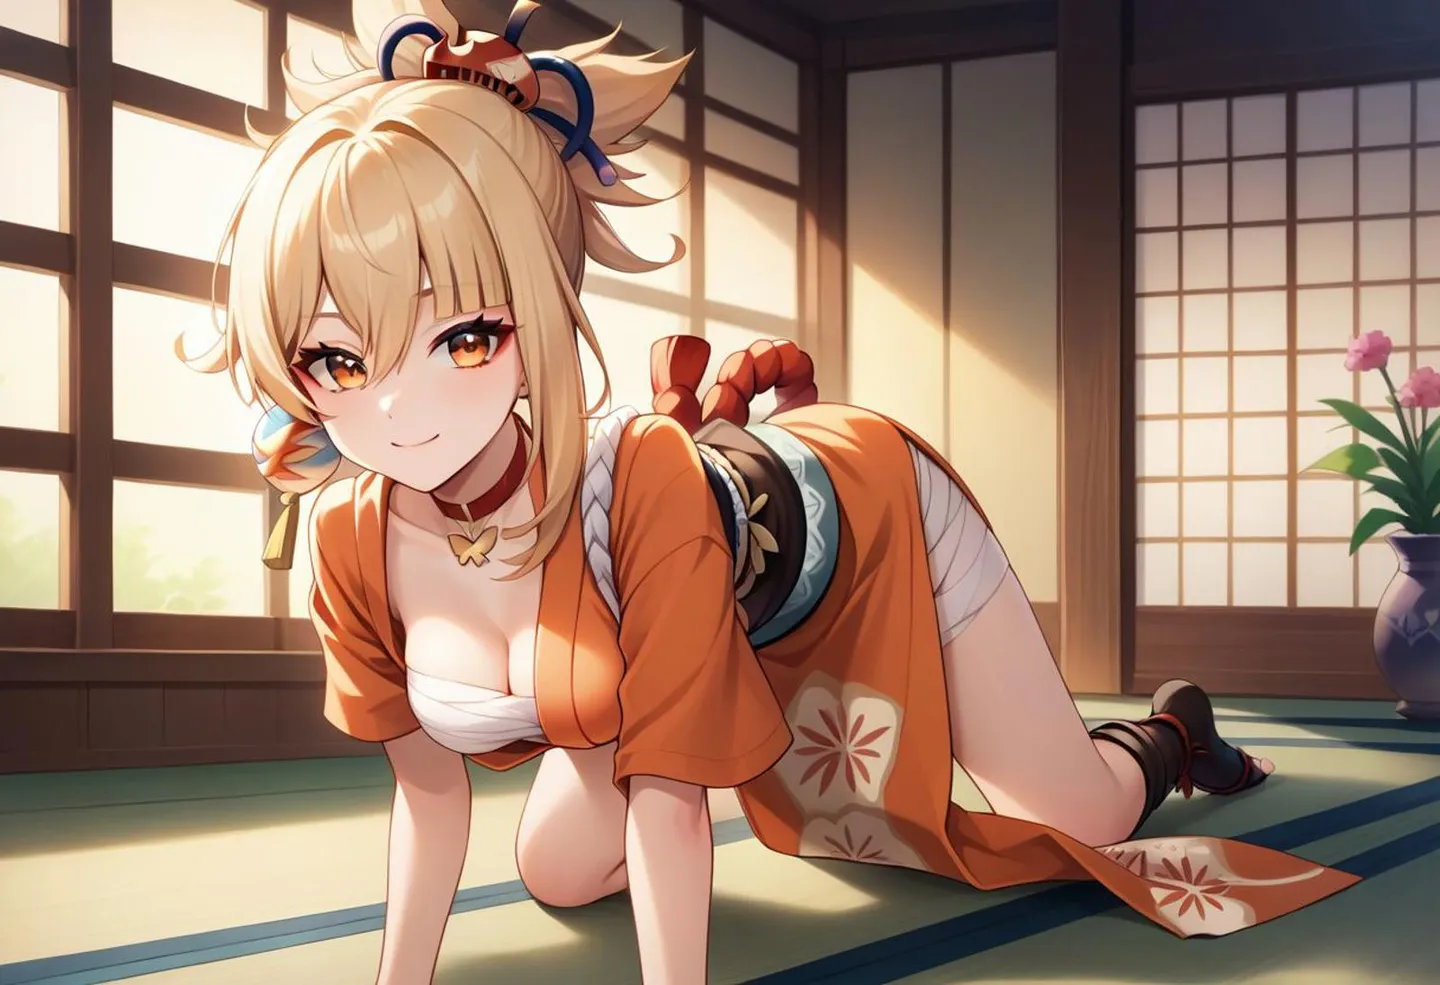 Anime girl dressed in a traditional kimono kneeling on a tatami mat in a sunlit Japanese room; AI generated using stable diffusion.